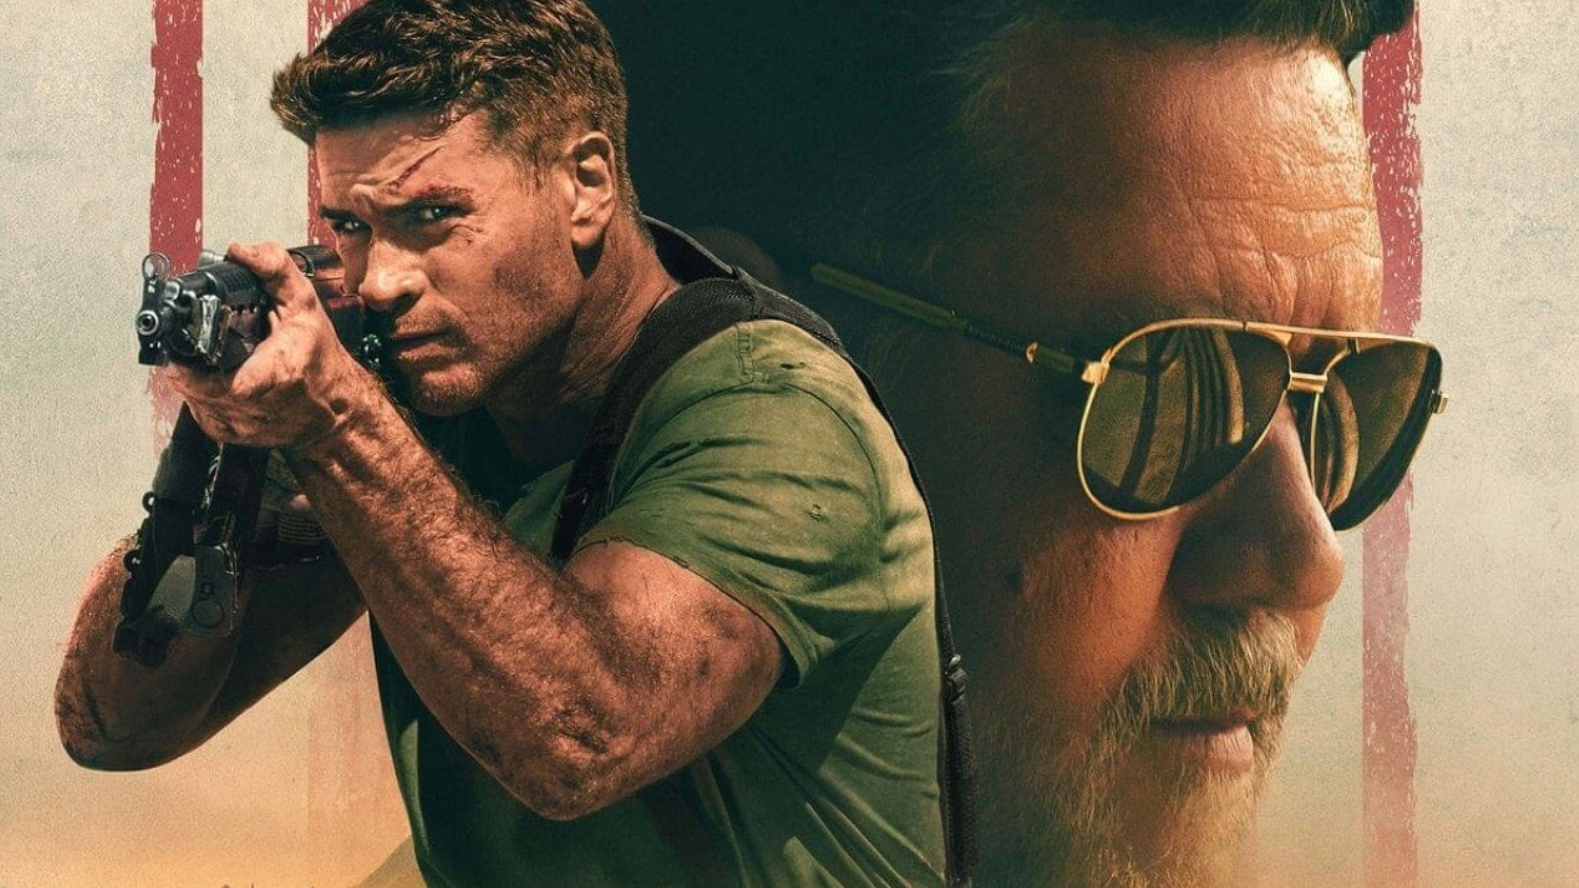 Land of Bad Netflix Streaming Release Date Set for Russell Crowe Action Thriller